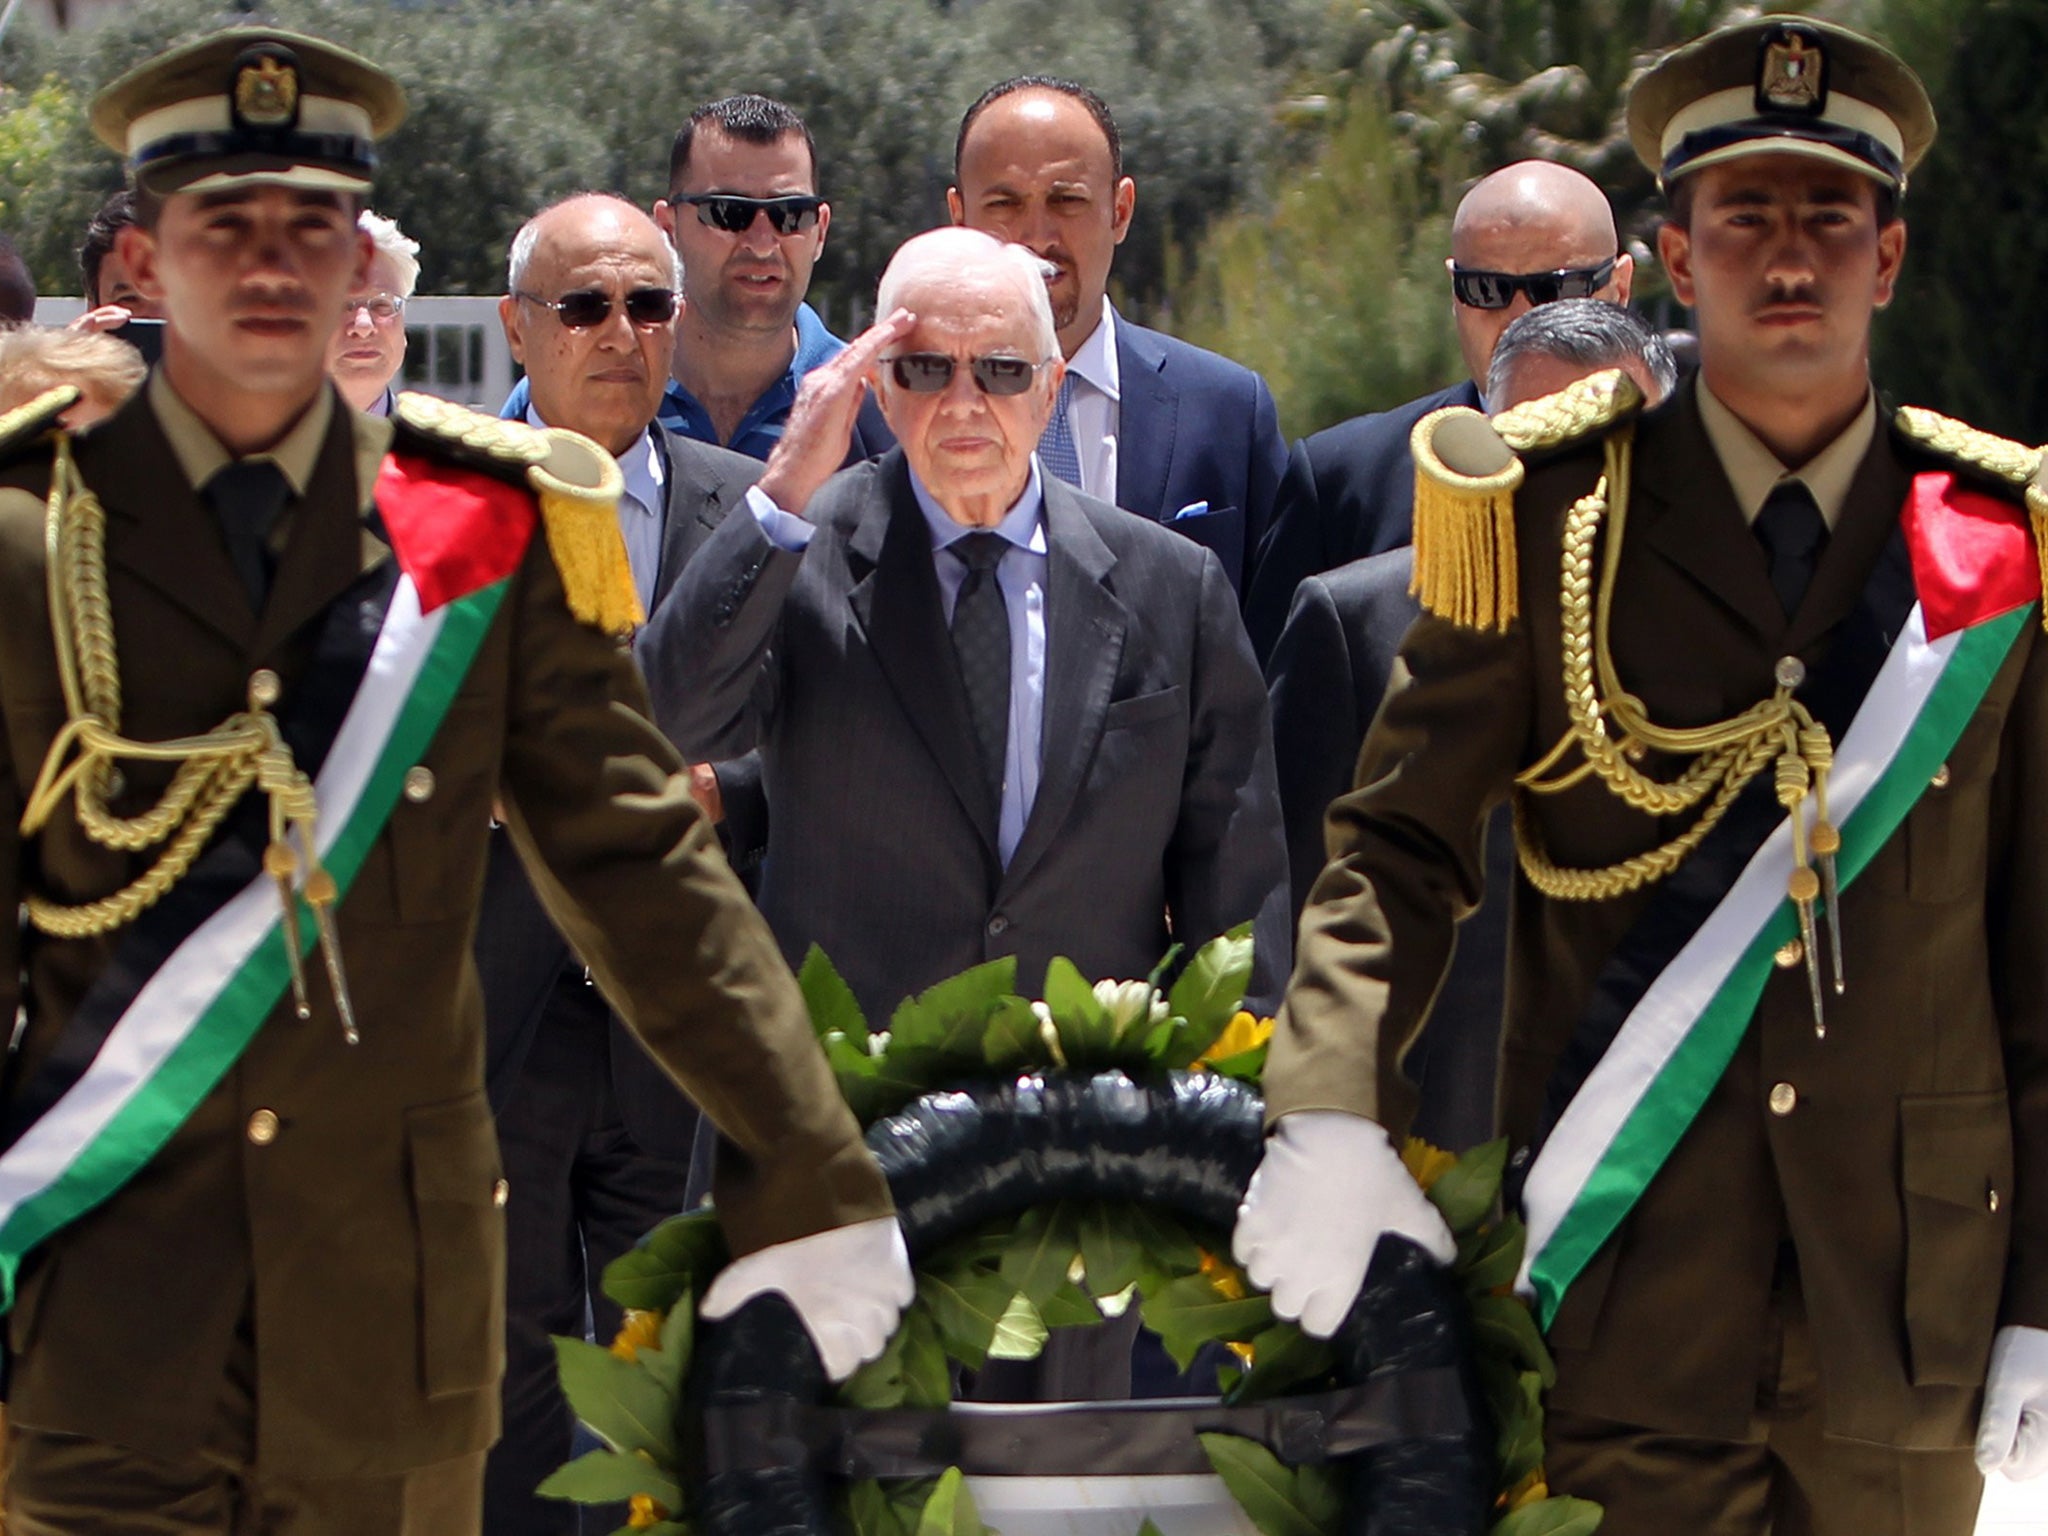 Jimmy Carter prepares to lay a wreath of flowers on the tomb of the late Palestinian leader Yasser Arafat